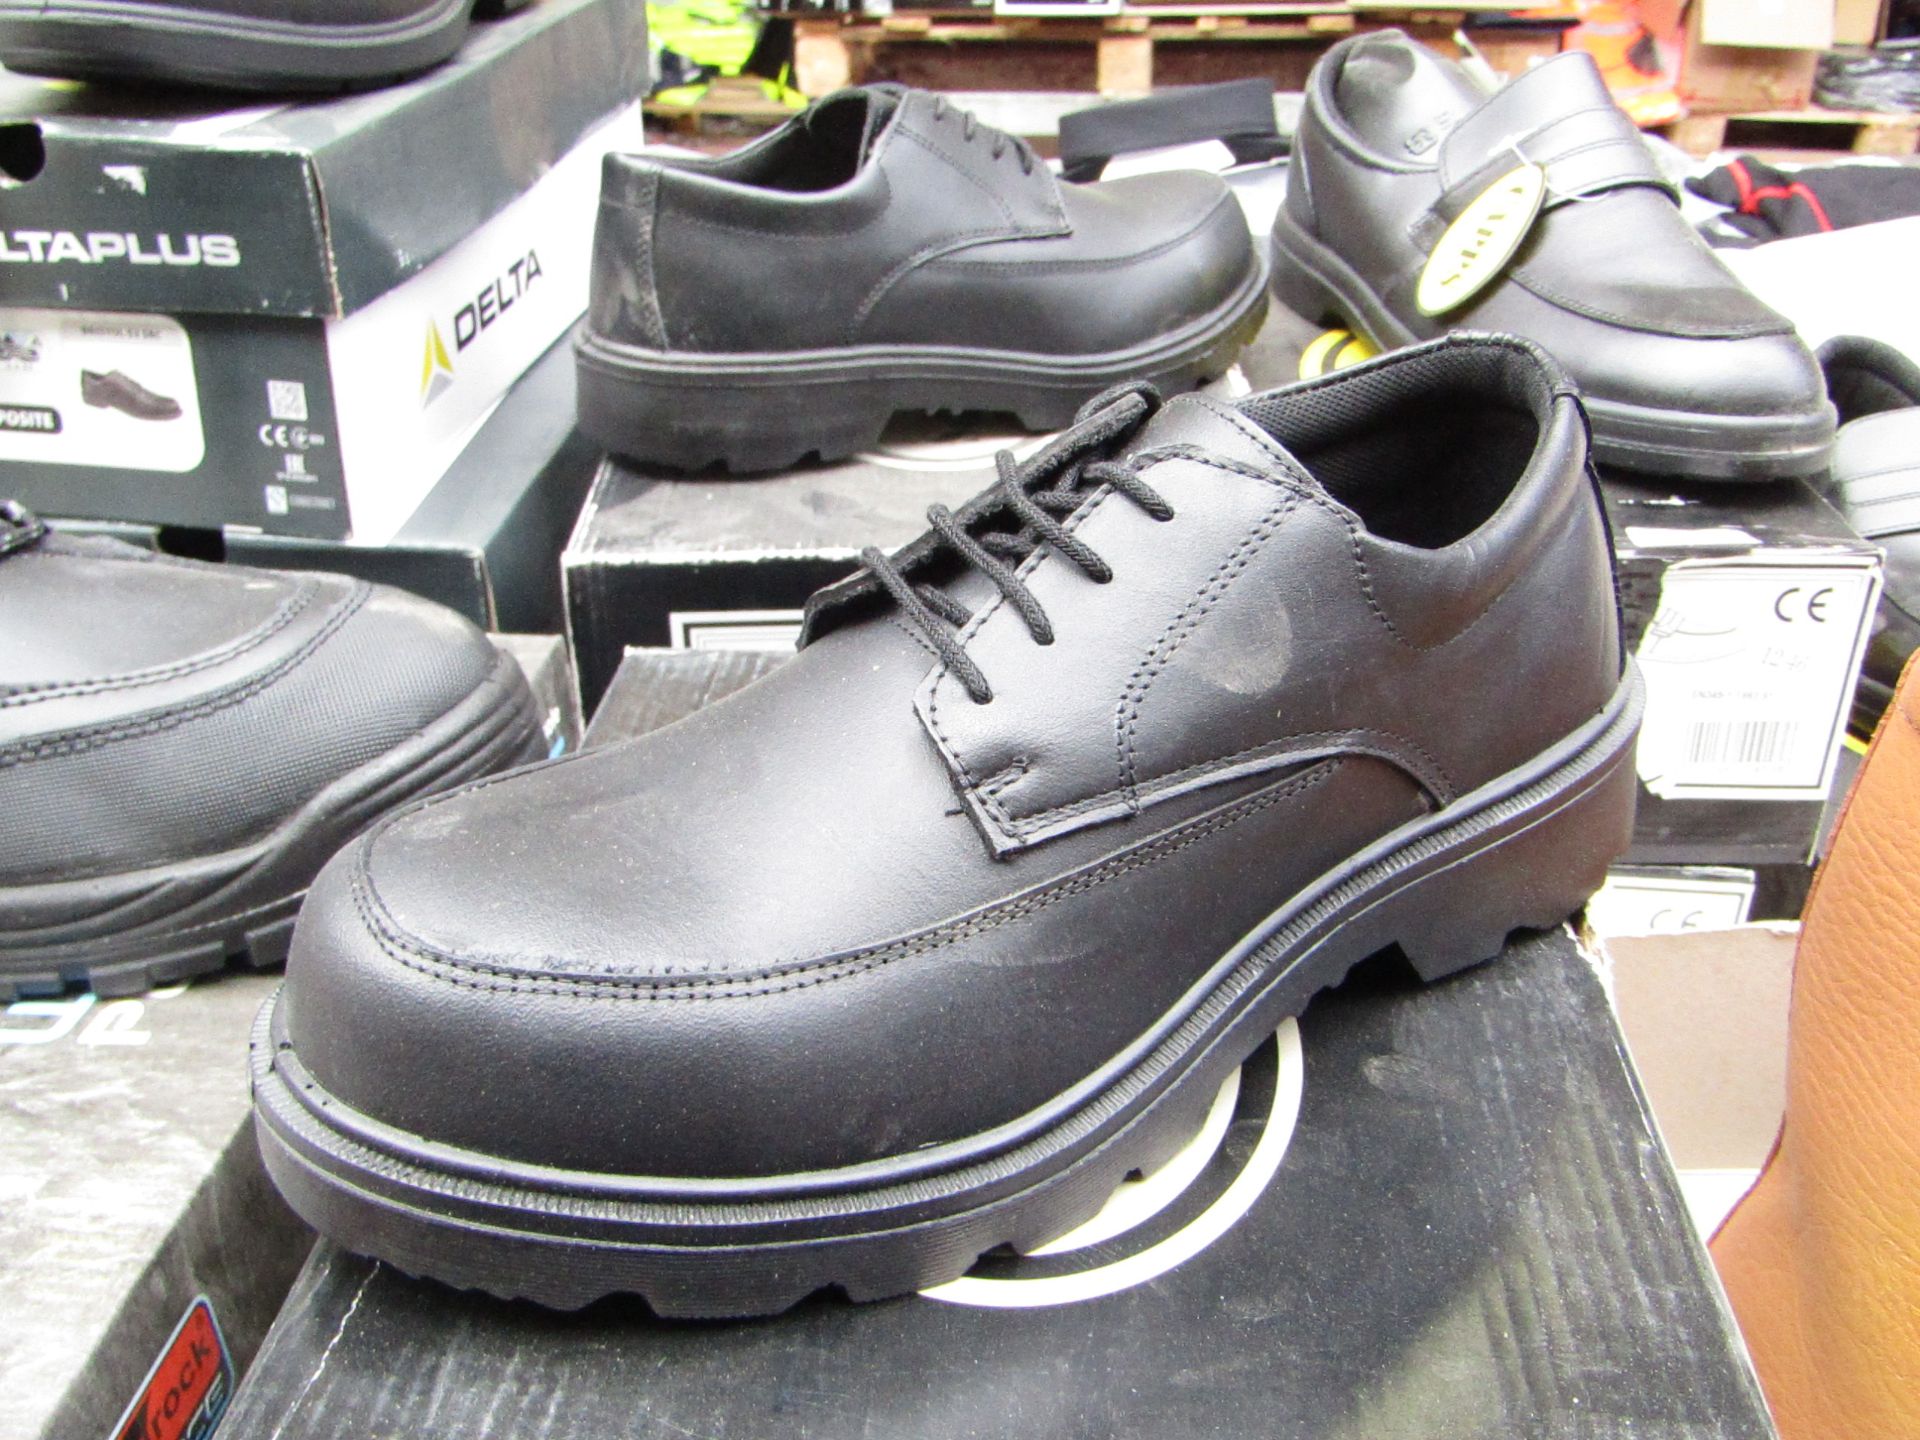 Capps laced steel toe cap oxford shoe, size 8, new and boxed.